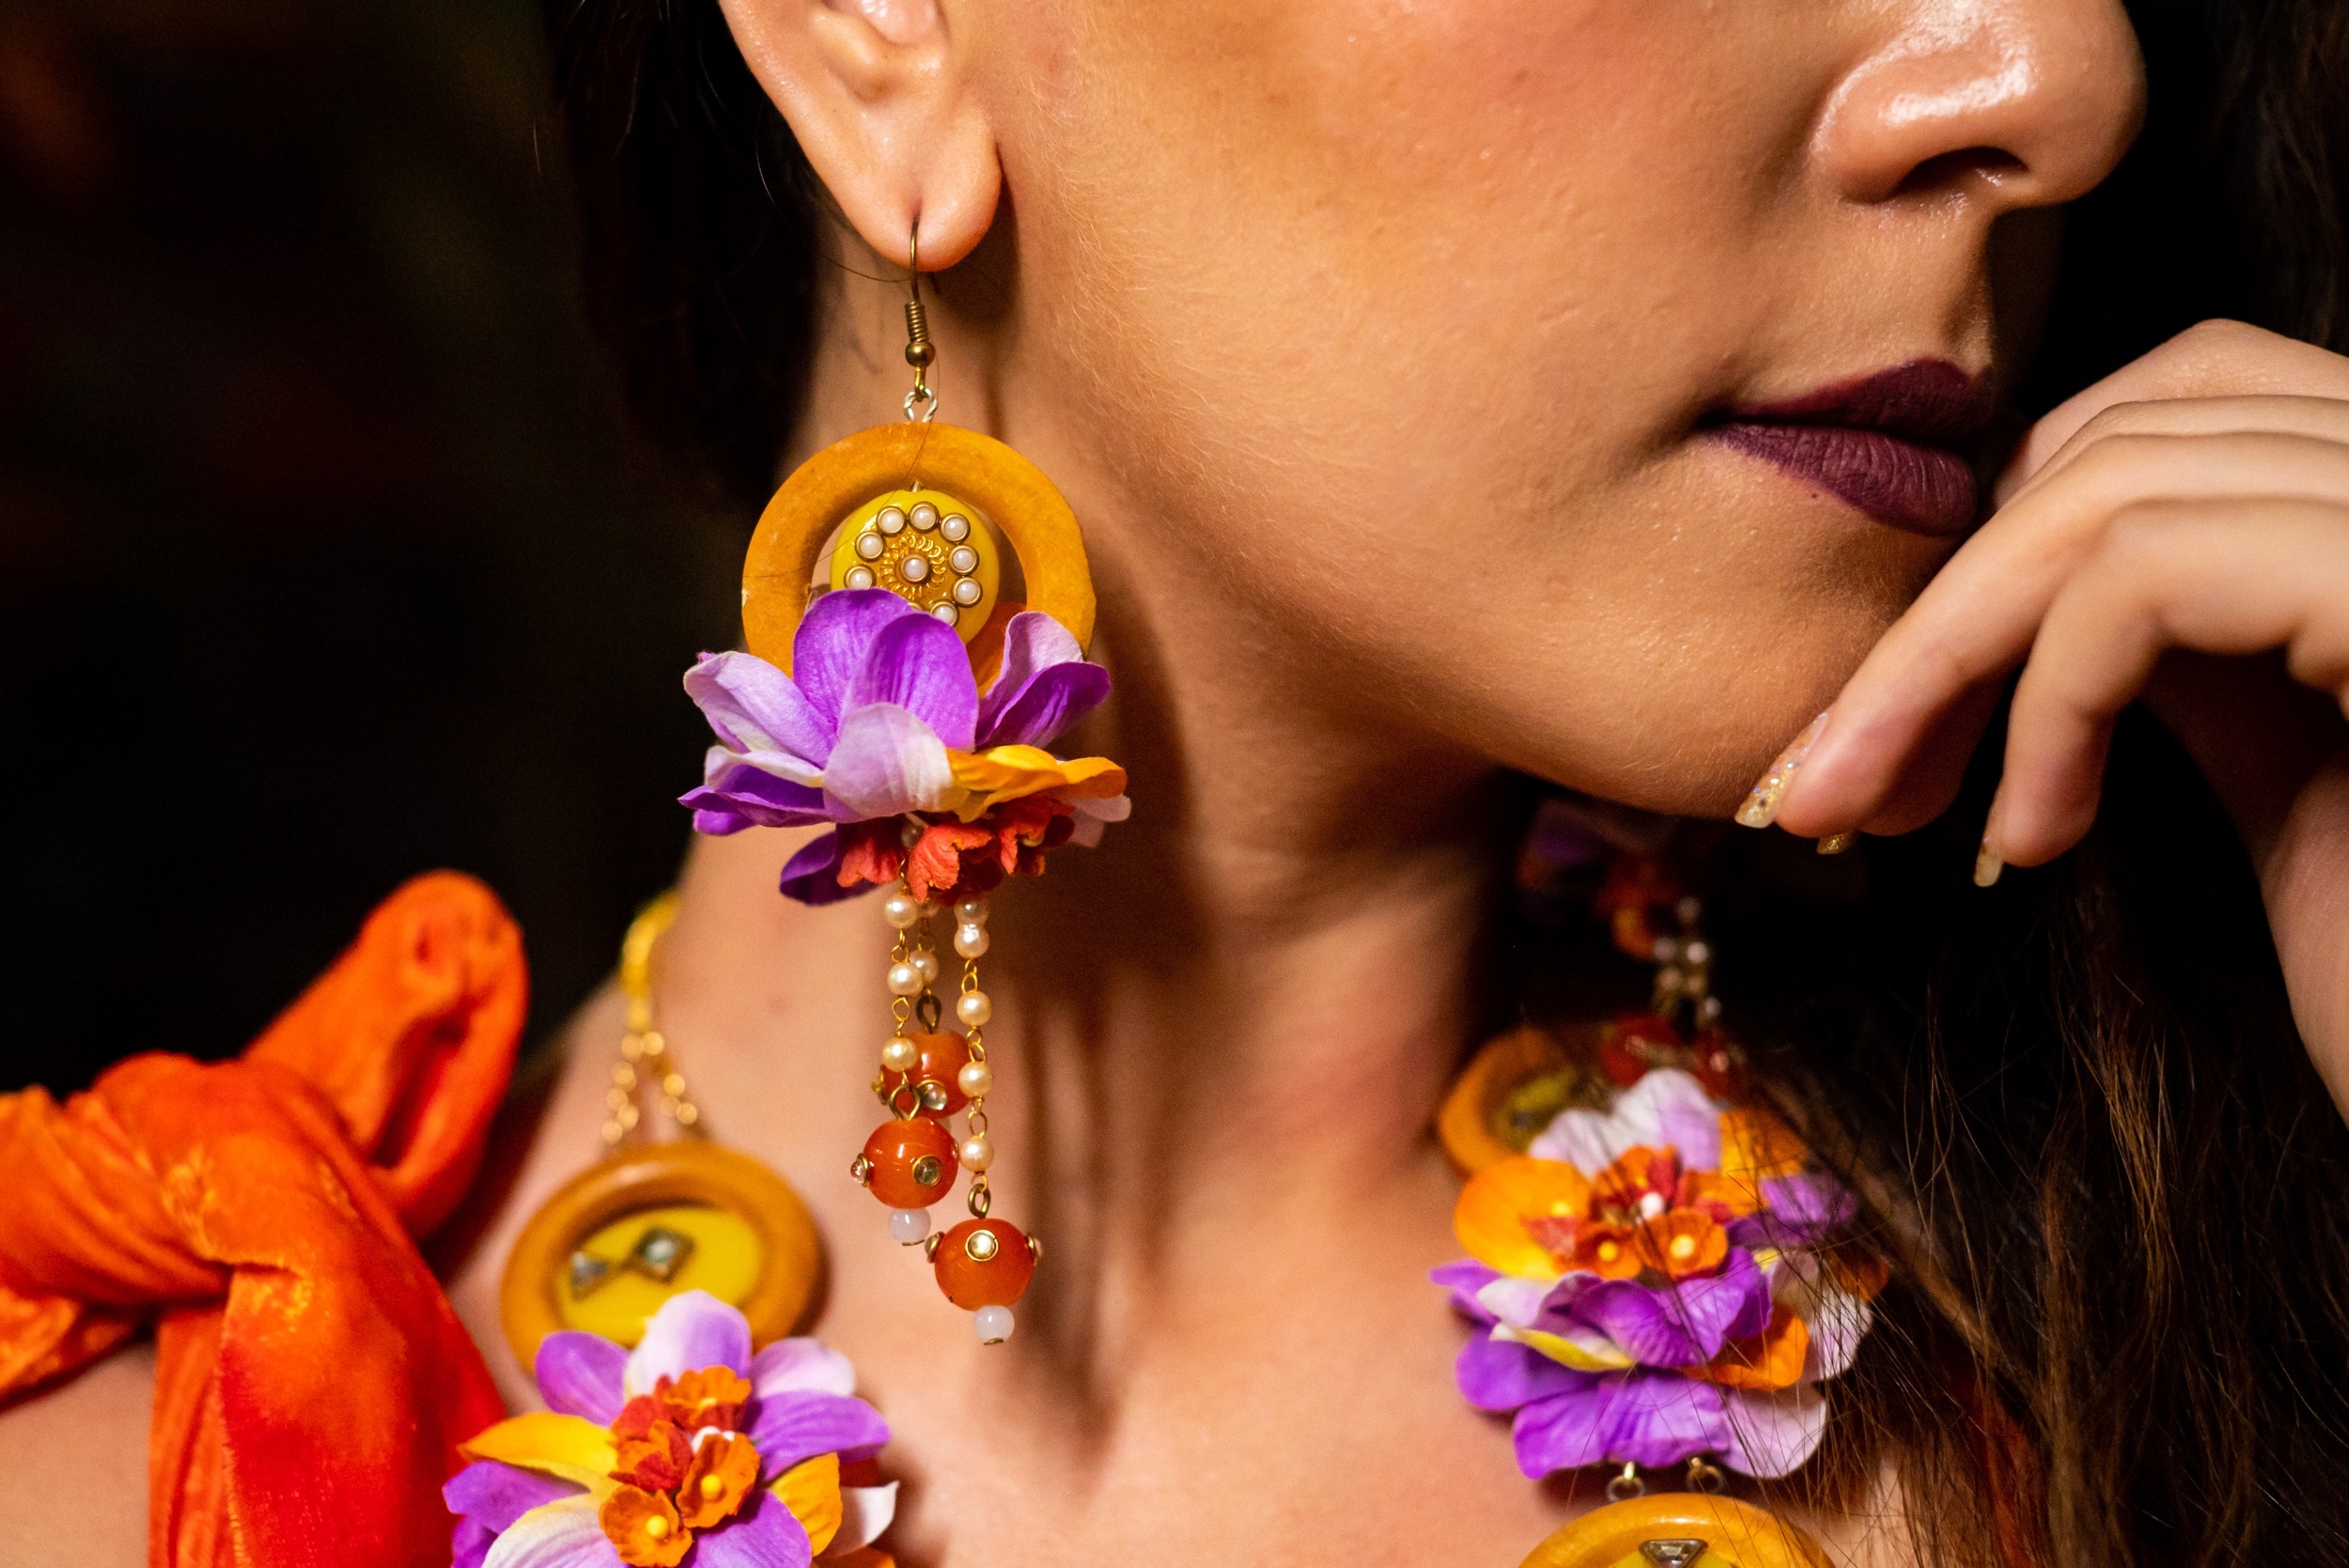 Floral art | Purple & Gold Floral Long Earings with wooden Bottons for Women undefined